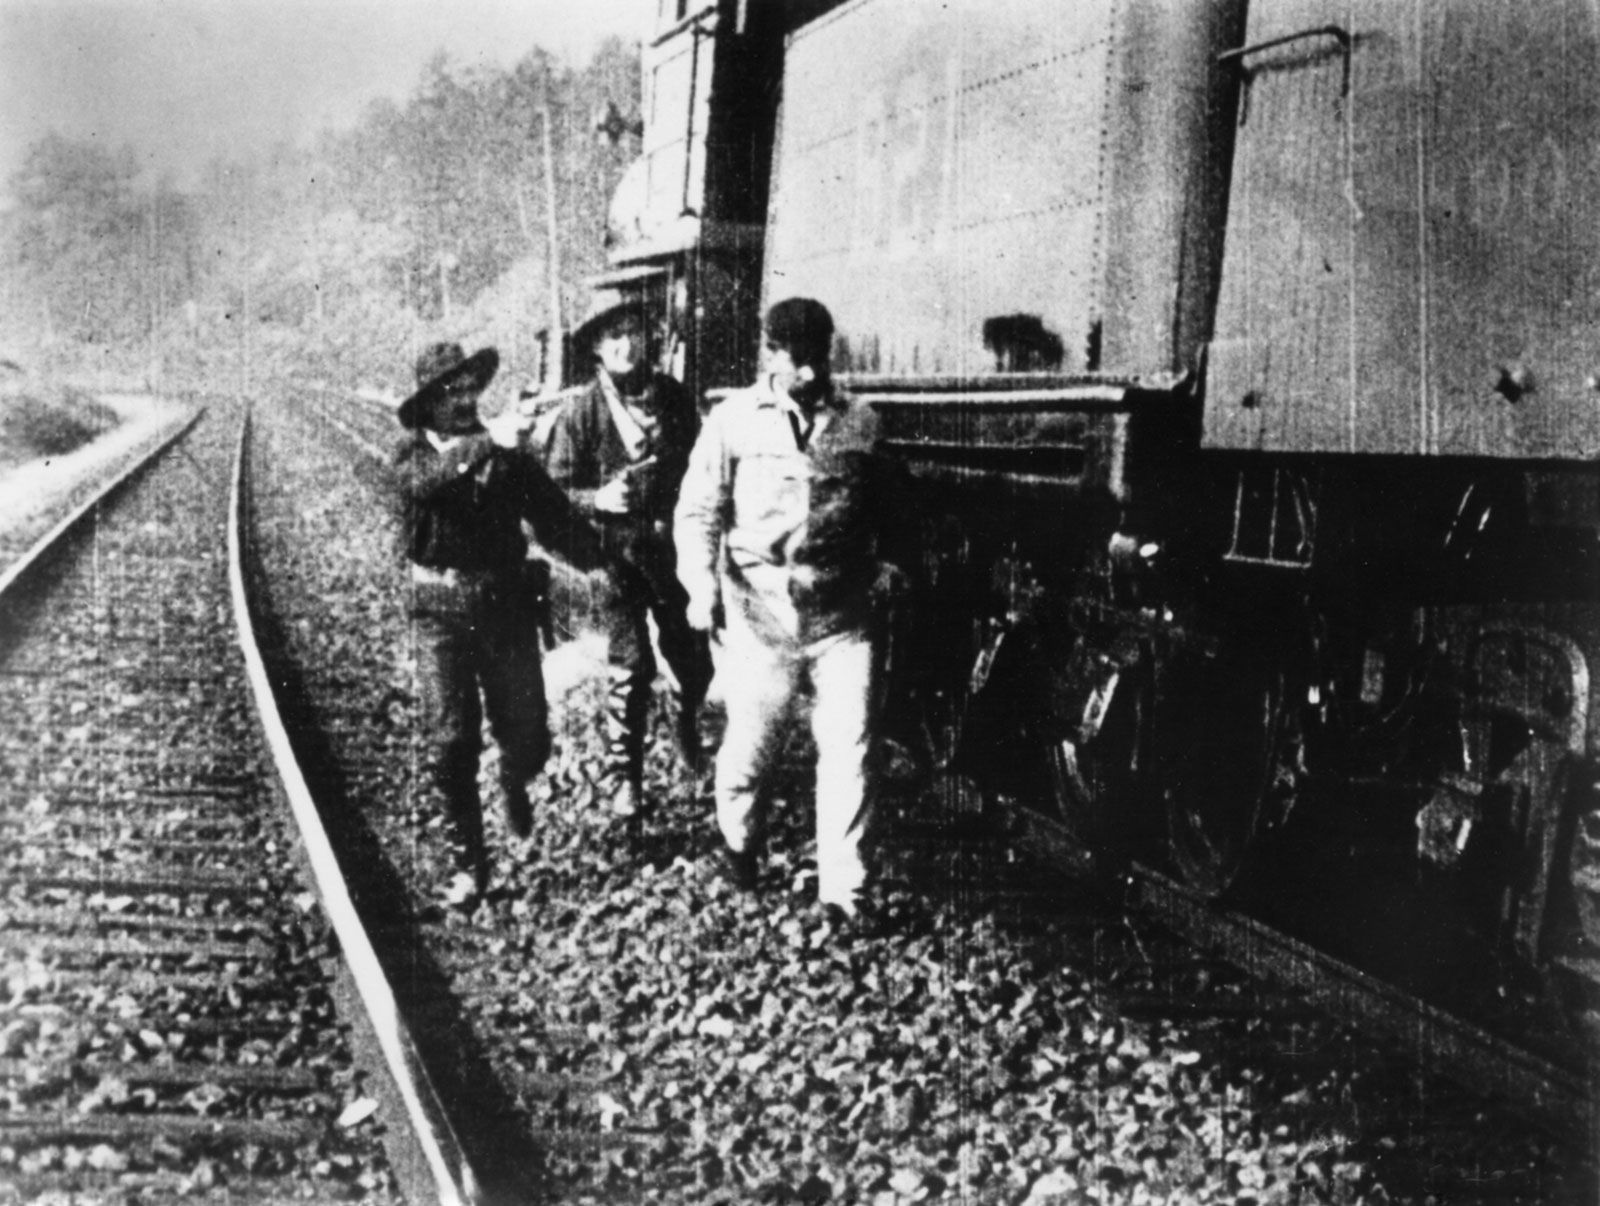 80% Of People Can’t Get 12/18 on This General Knowledge Quiz (feat. Charlie Chaplin) — Can You? The Great Train Robbery 1903